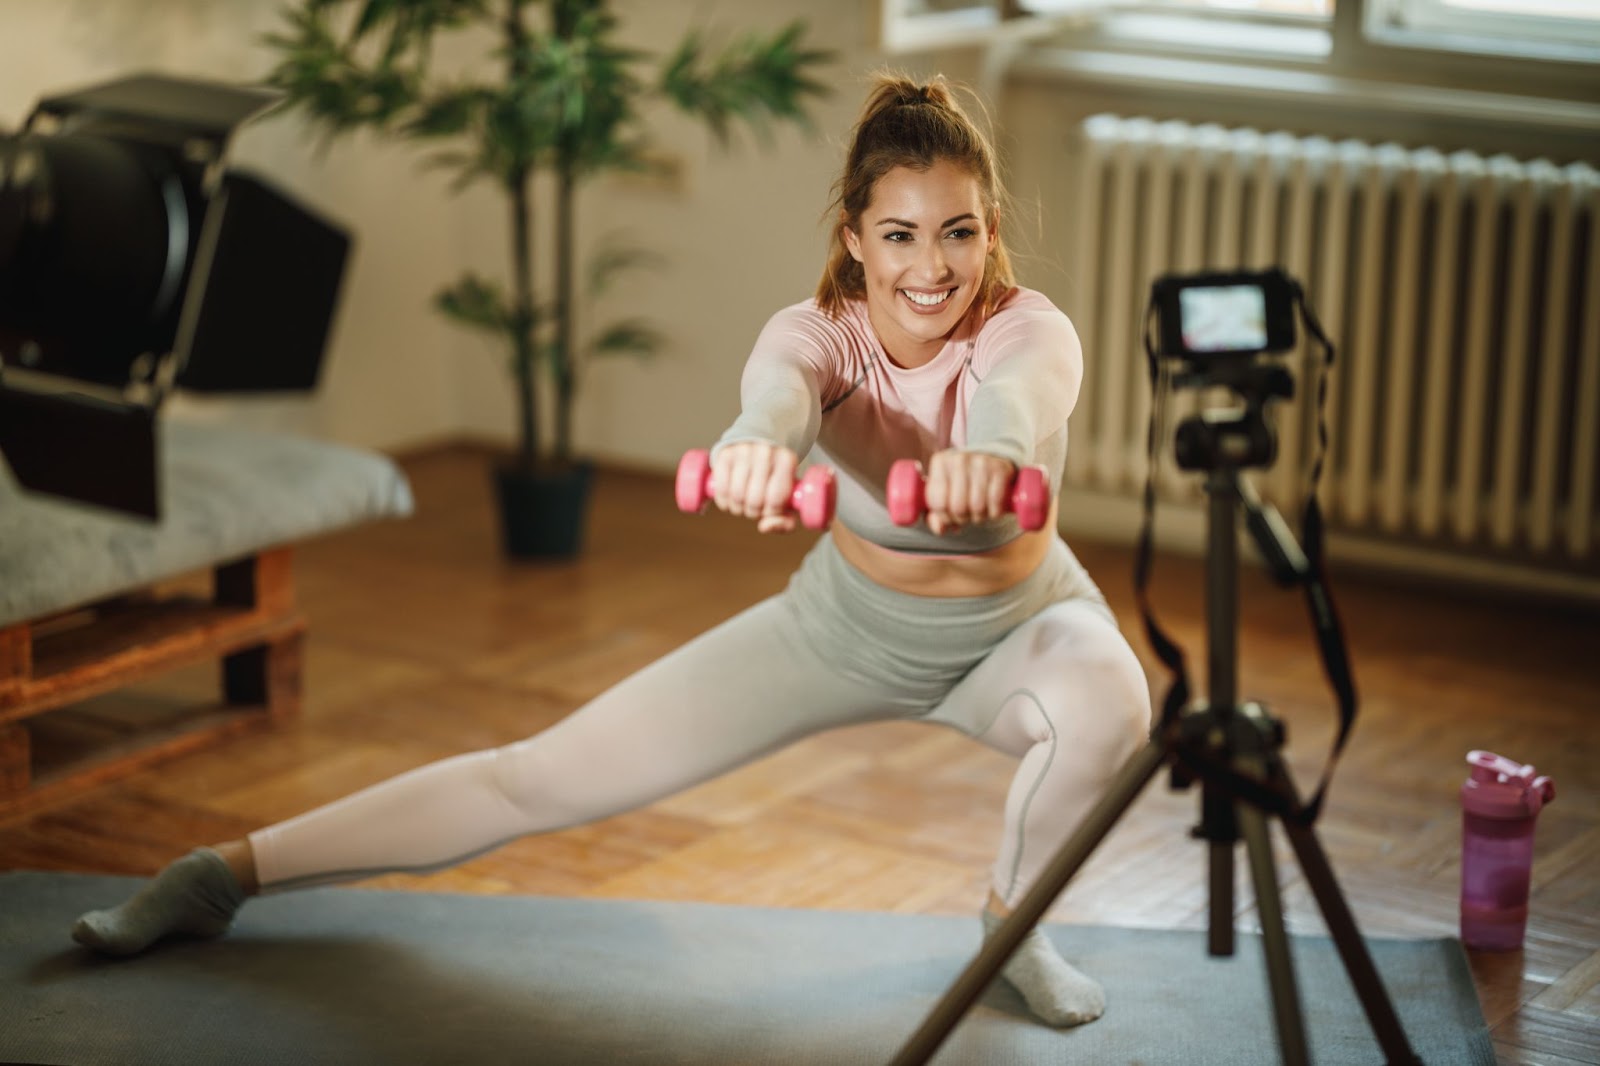 Fitness model recording a class from her living room